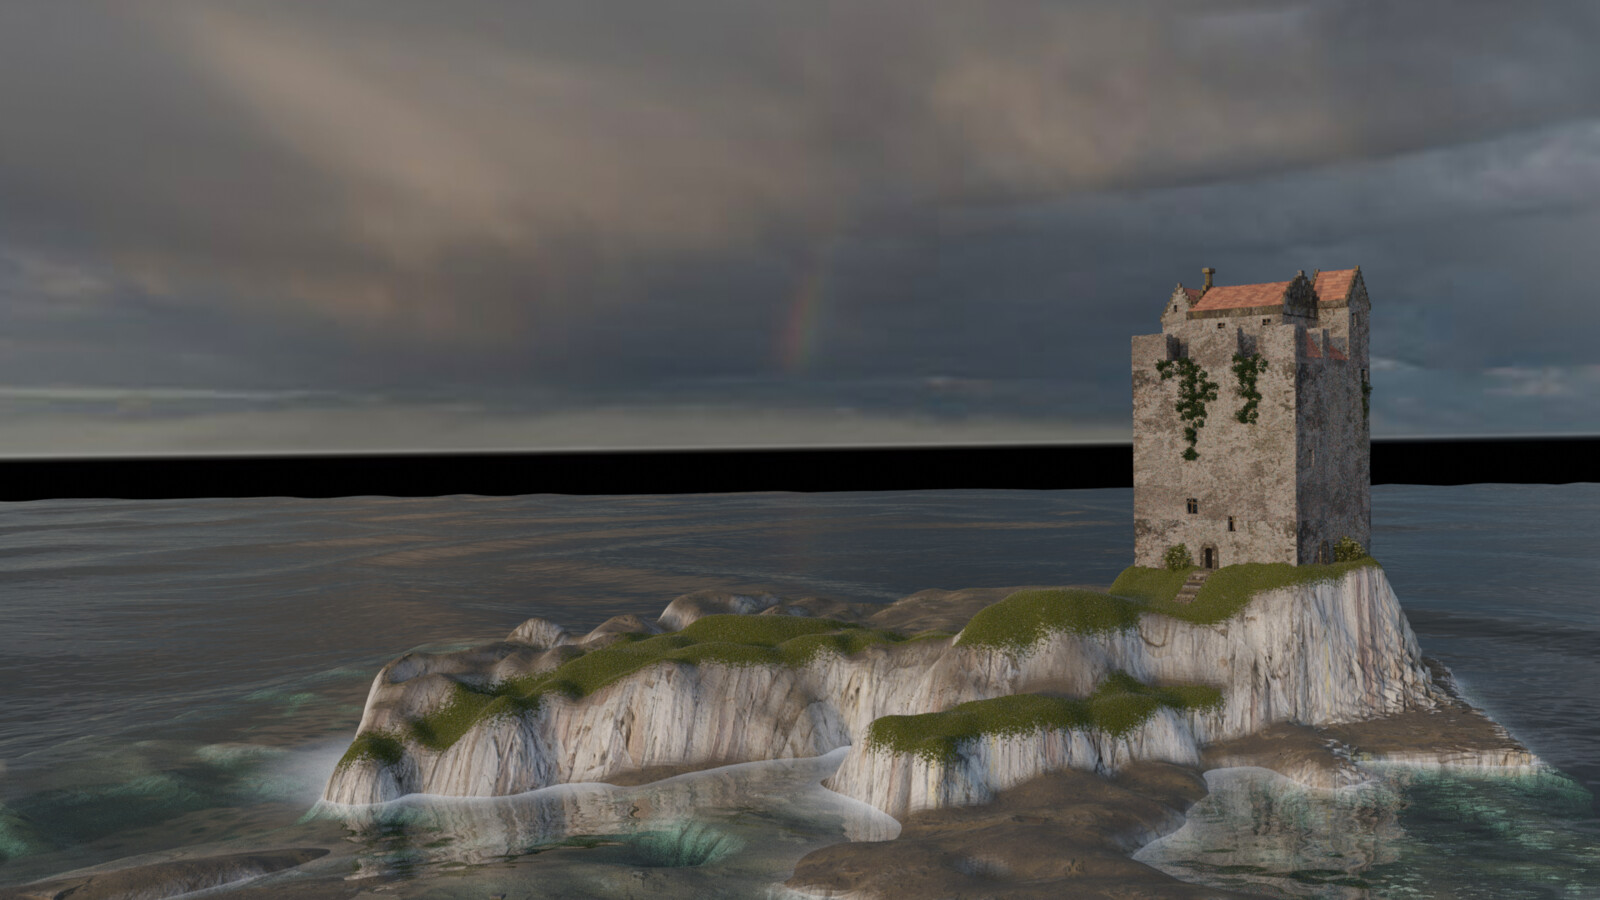 Castle Render 3 - scaling is difficult